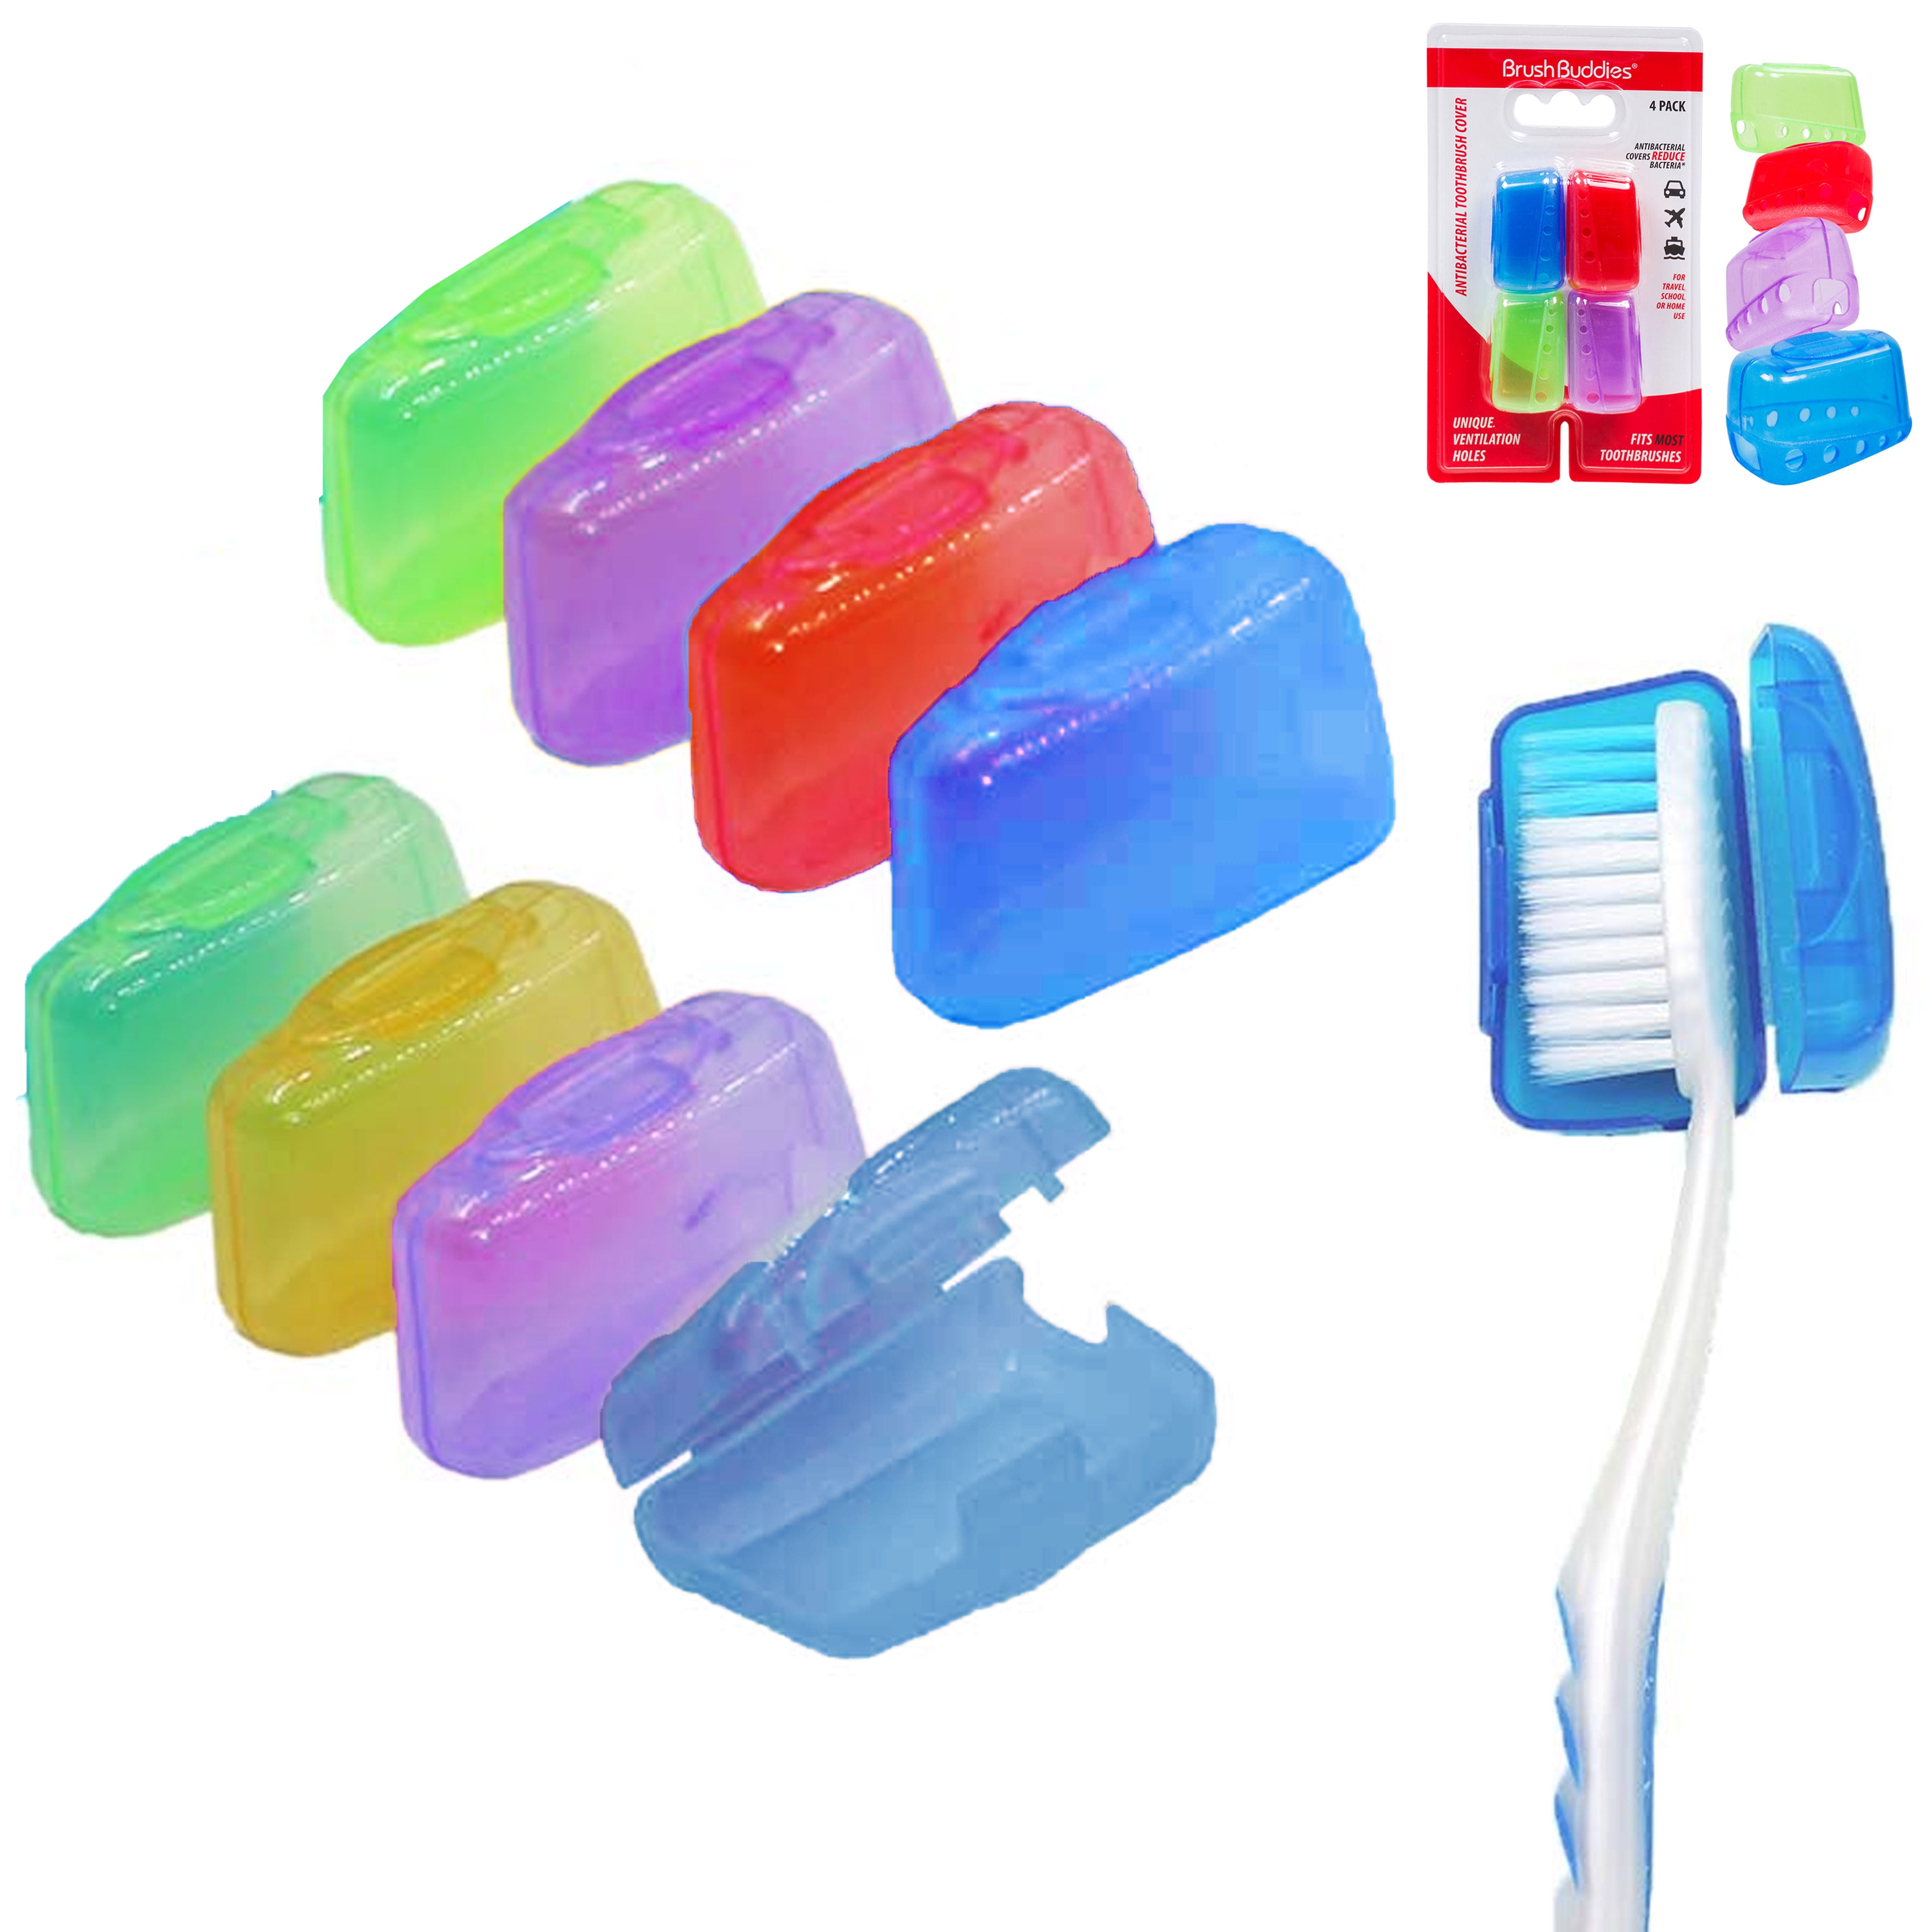 Toothbrush Head Cover Case Cleaner Guards Caps 6pcs Slicone Anti 